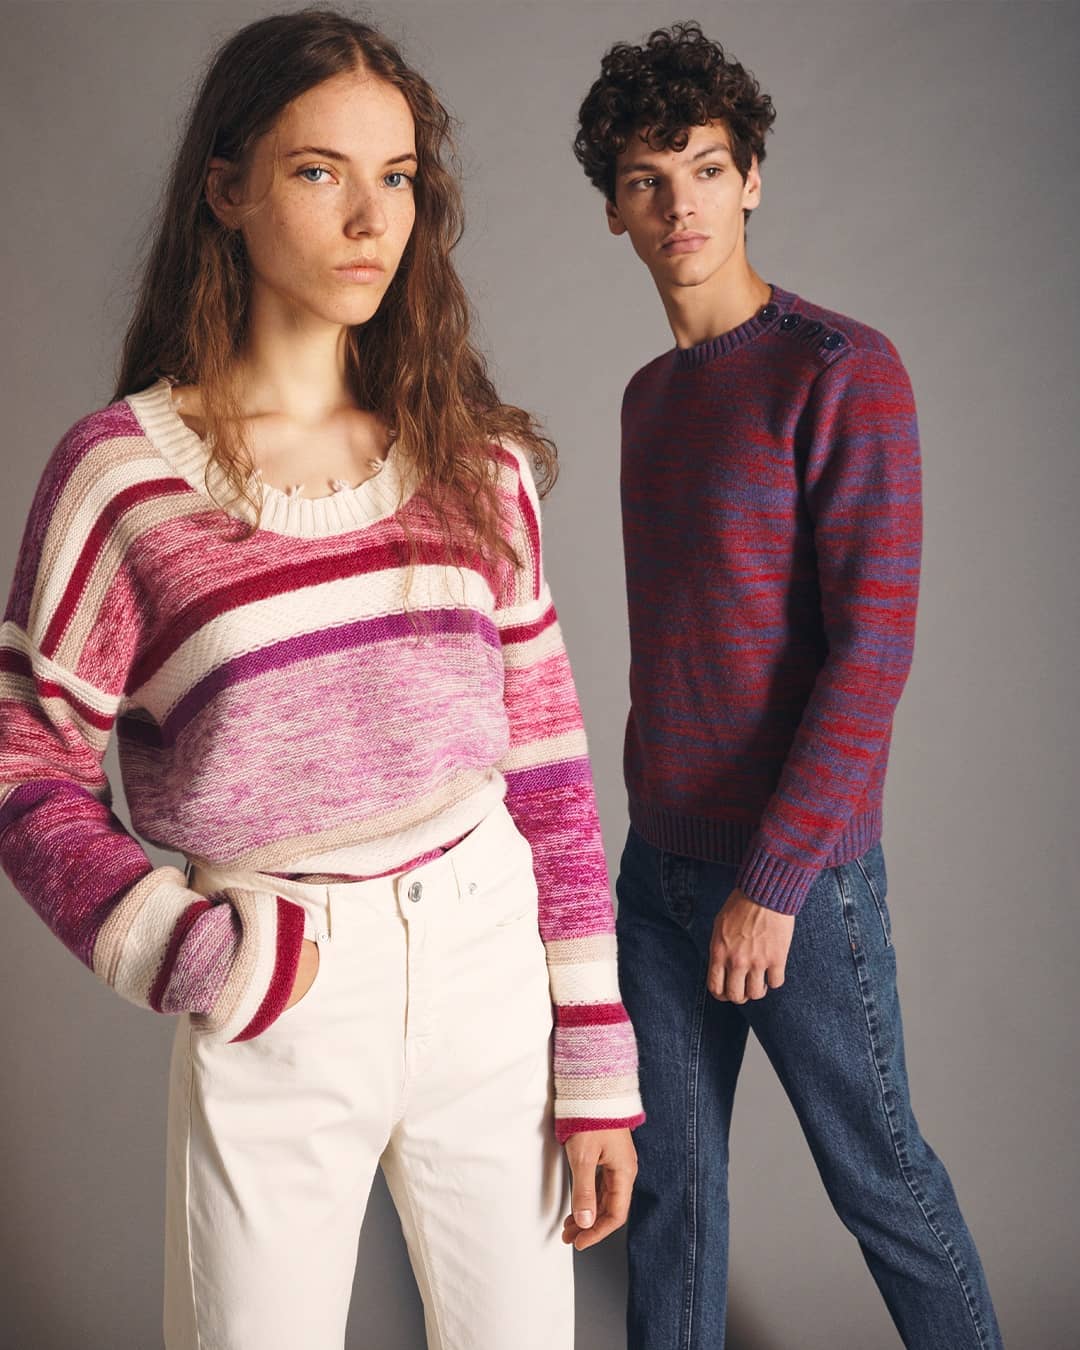 United Colors of Benetton - Pink soulmates.
Benetton Knitwear, since 1965. Collection available exclusively on Benetton.com and in the following stores: Treviso, Cortina, Capri, St. Moritz, St. Tropez...